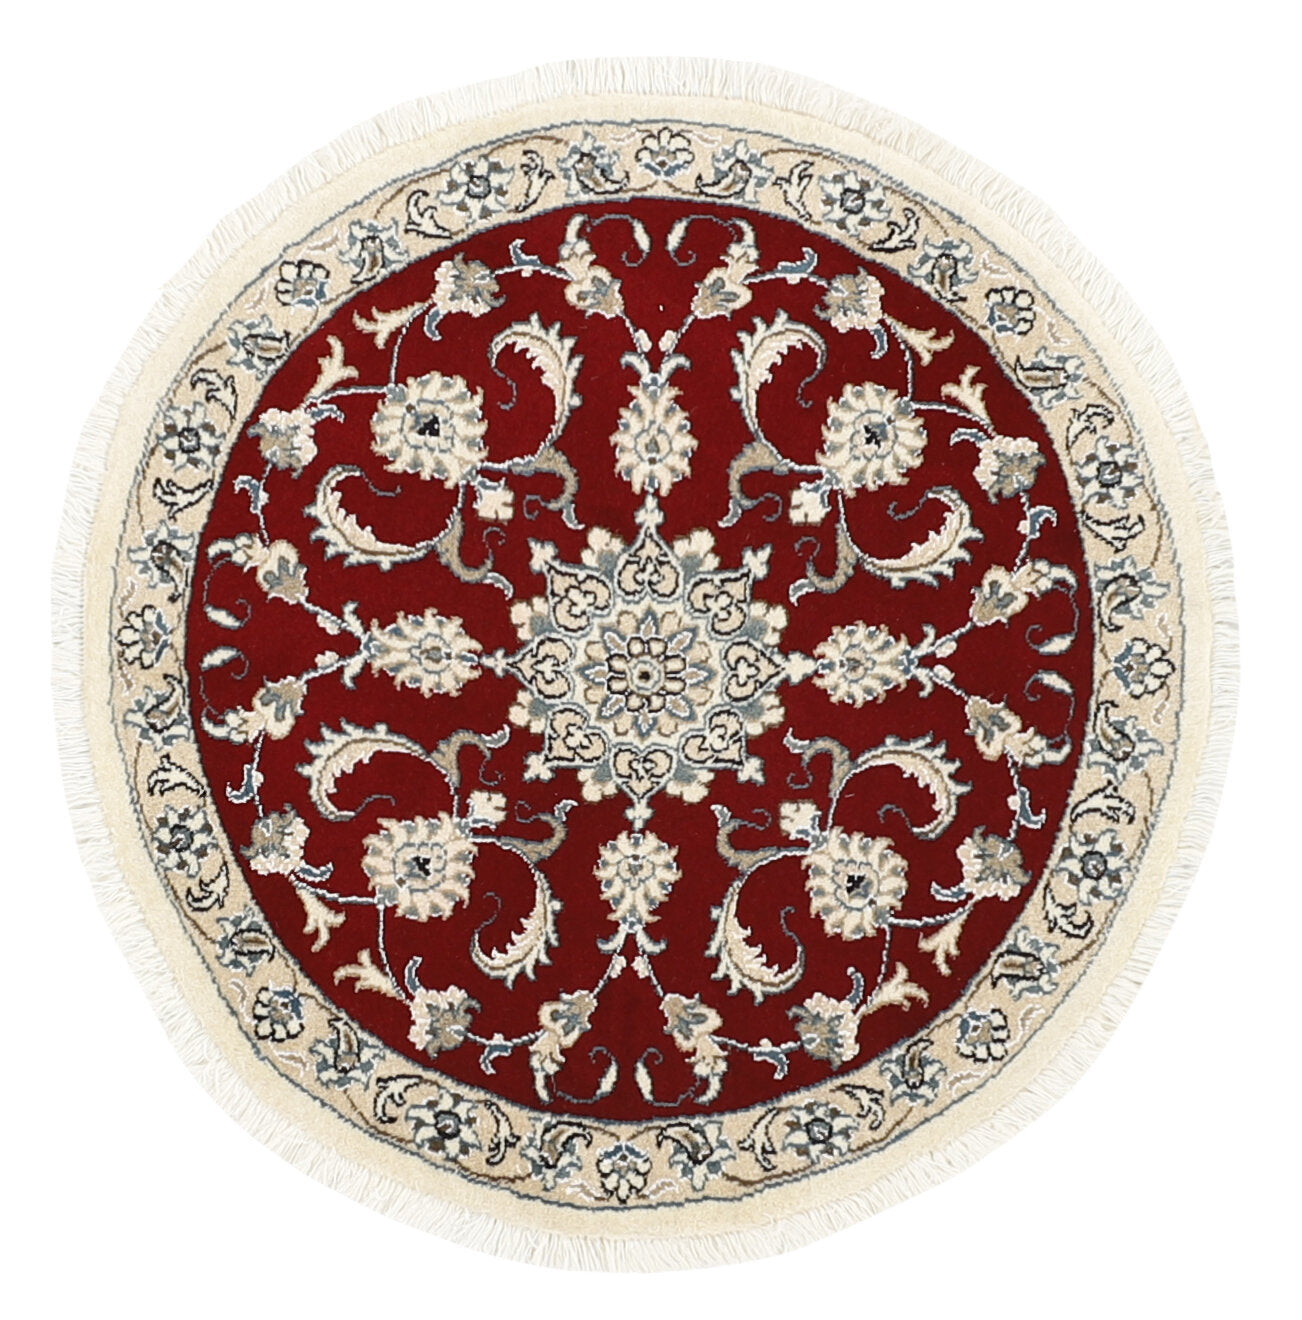 Authentic persian circle rug with a traditional floral design in cream and red